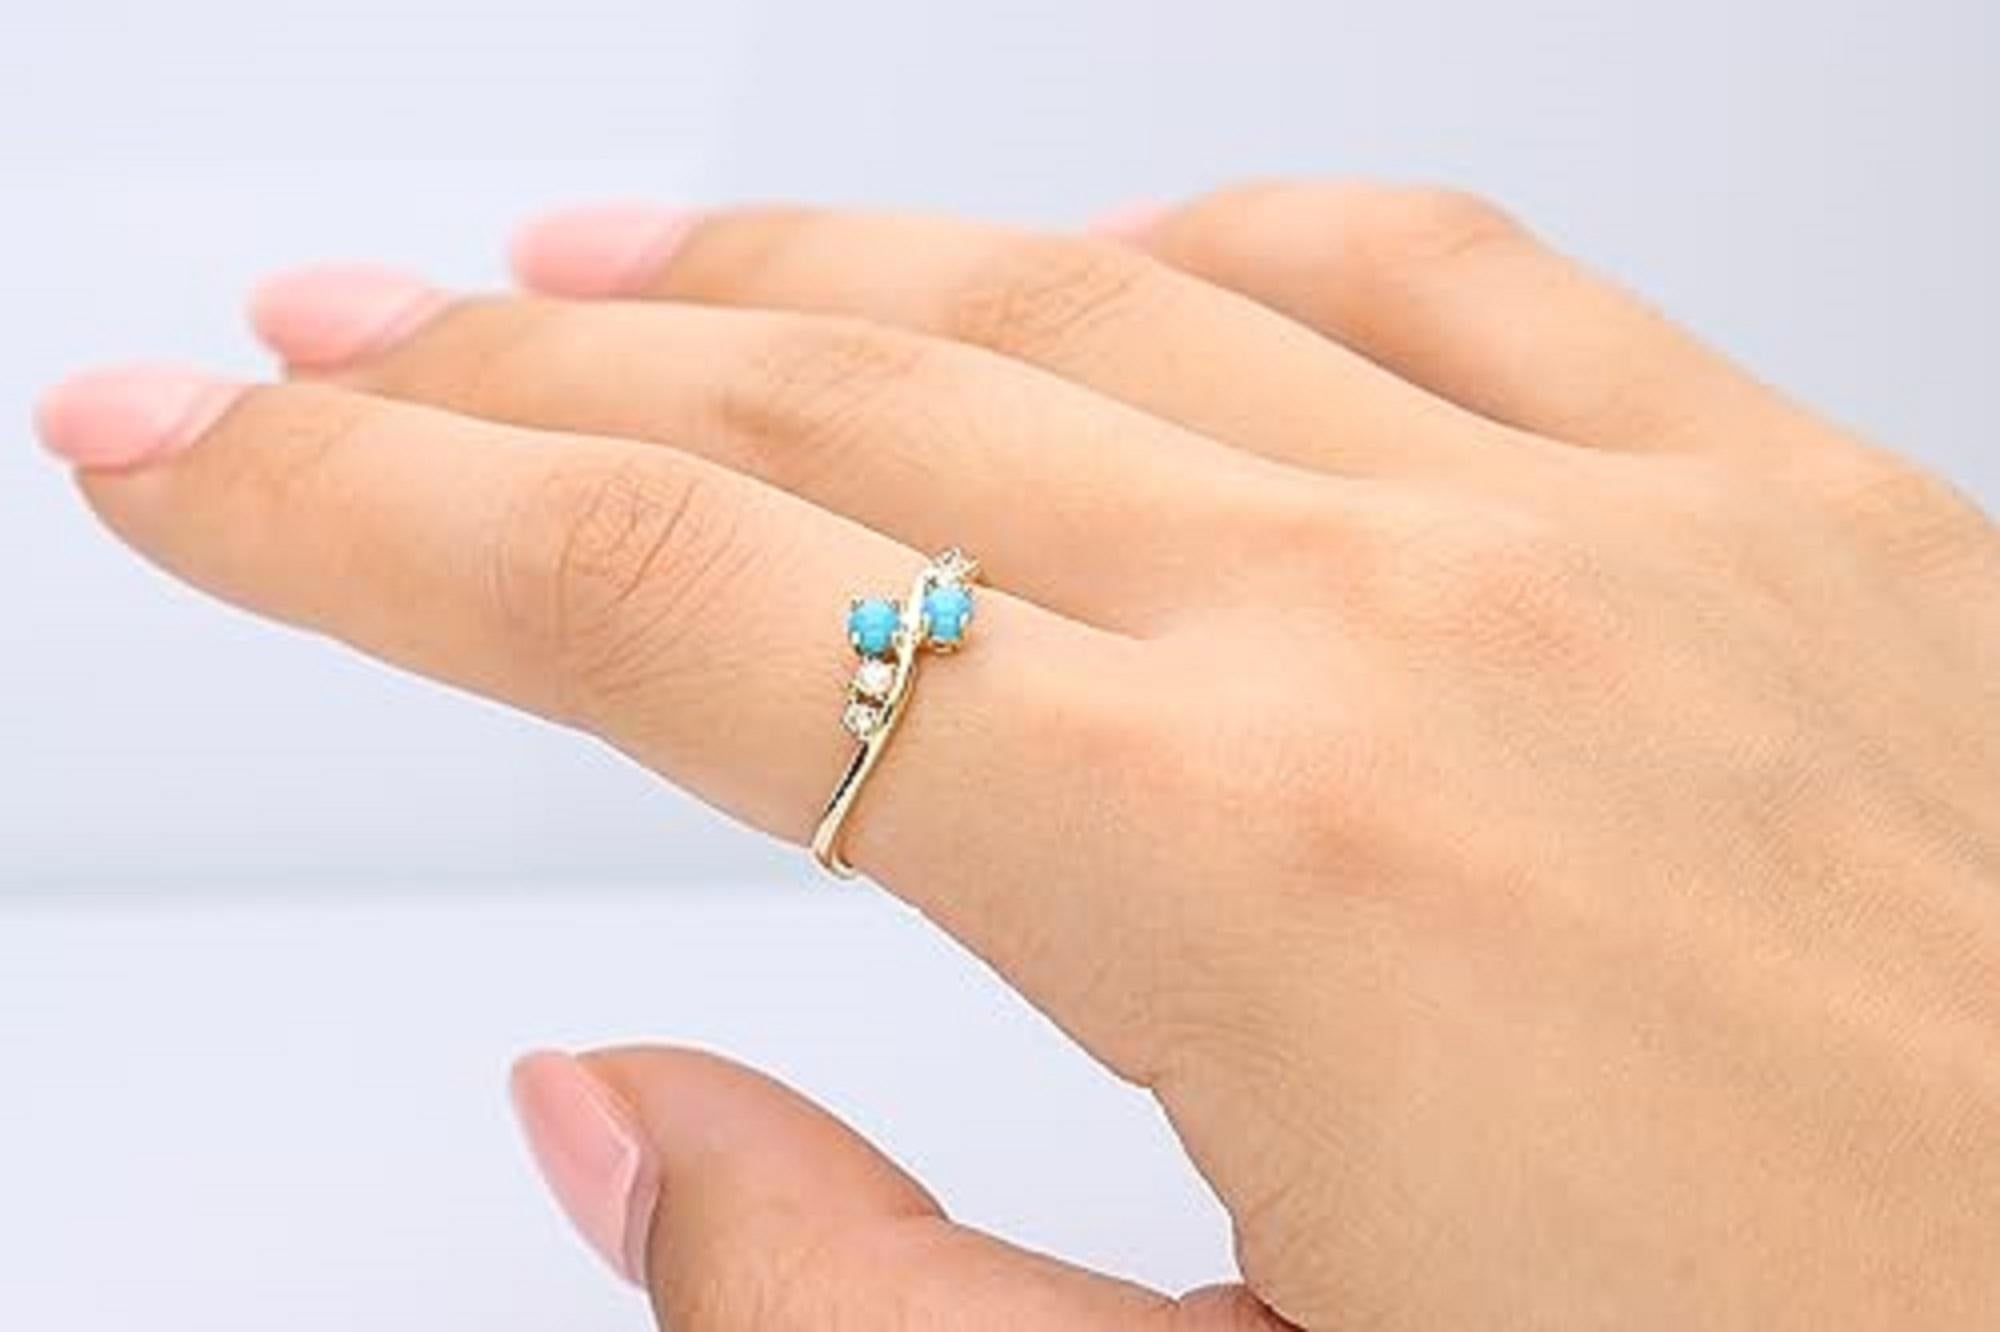 Decorate yourself in elegance with this Ring is crafted from 10-karat Yellow gold 3.0 mm Round-cut Turquoise (2 pcs) 0.29 carat and round-cut white diamond (4 pcs) 0.11 carat. This Ring is weight 1.51 grams. This delicate Ring is polished to a high